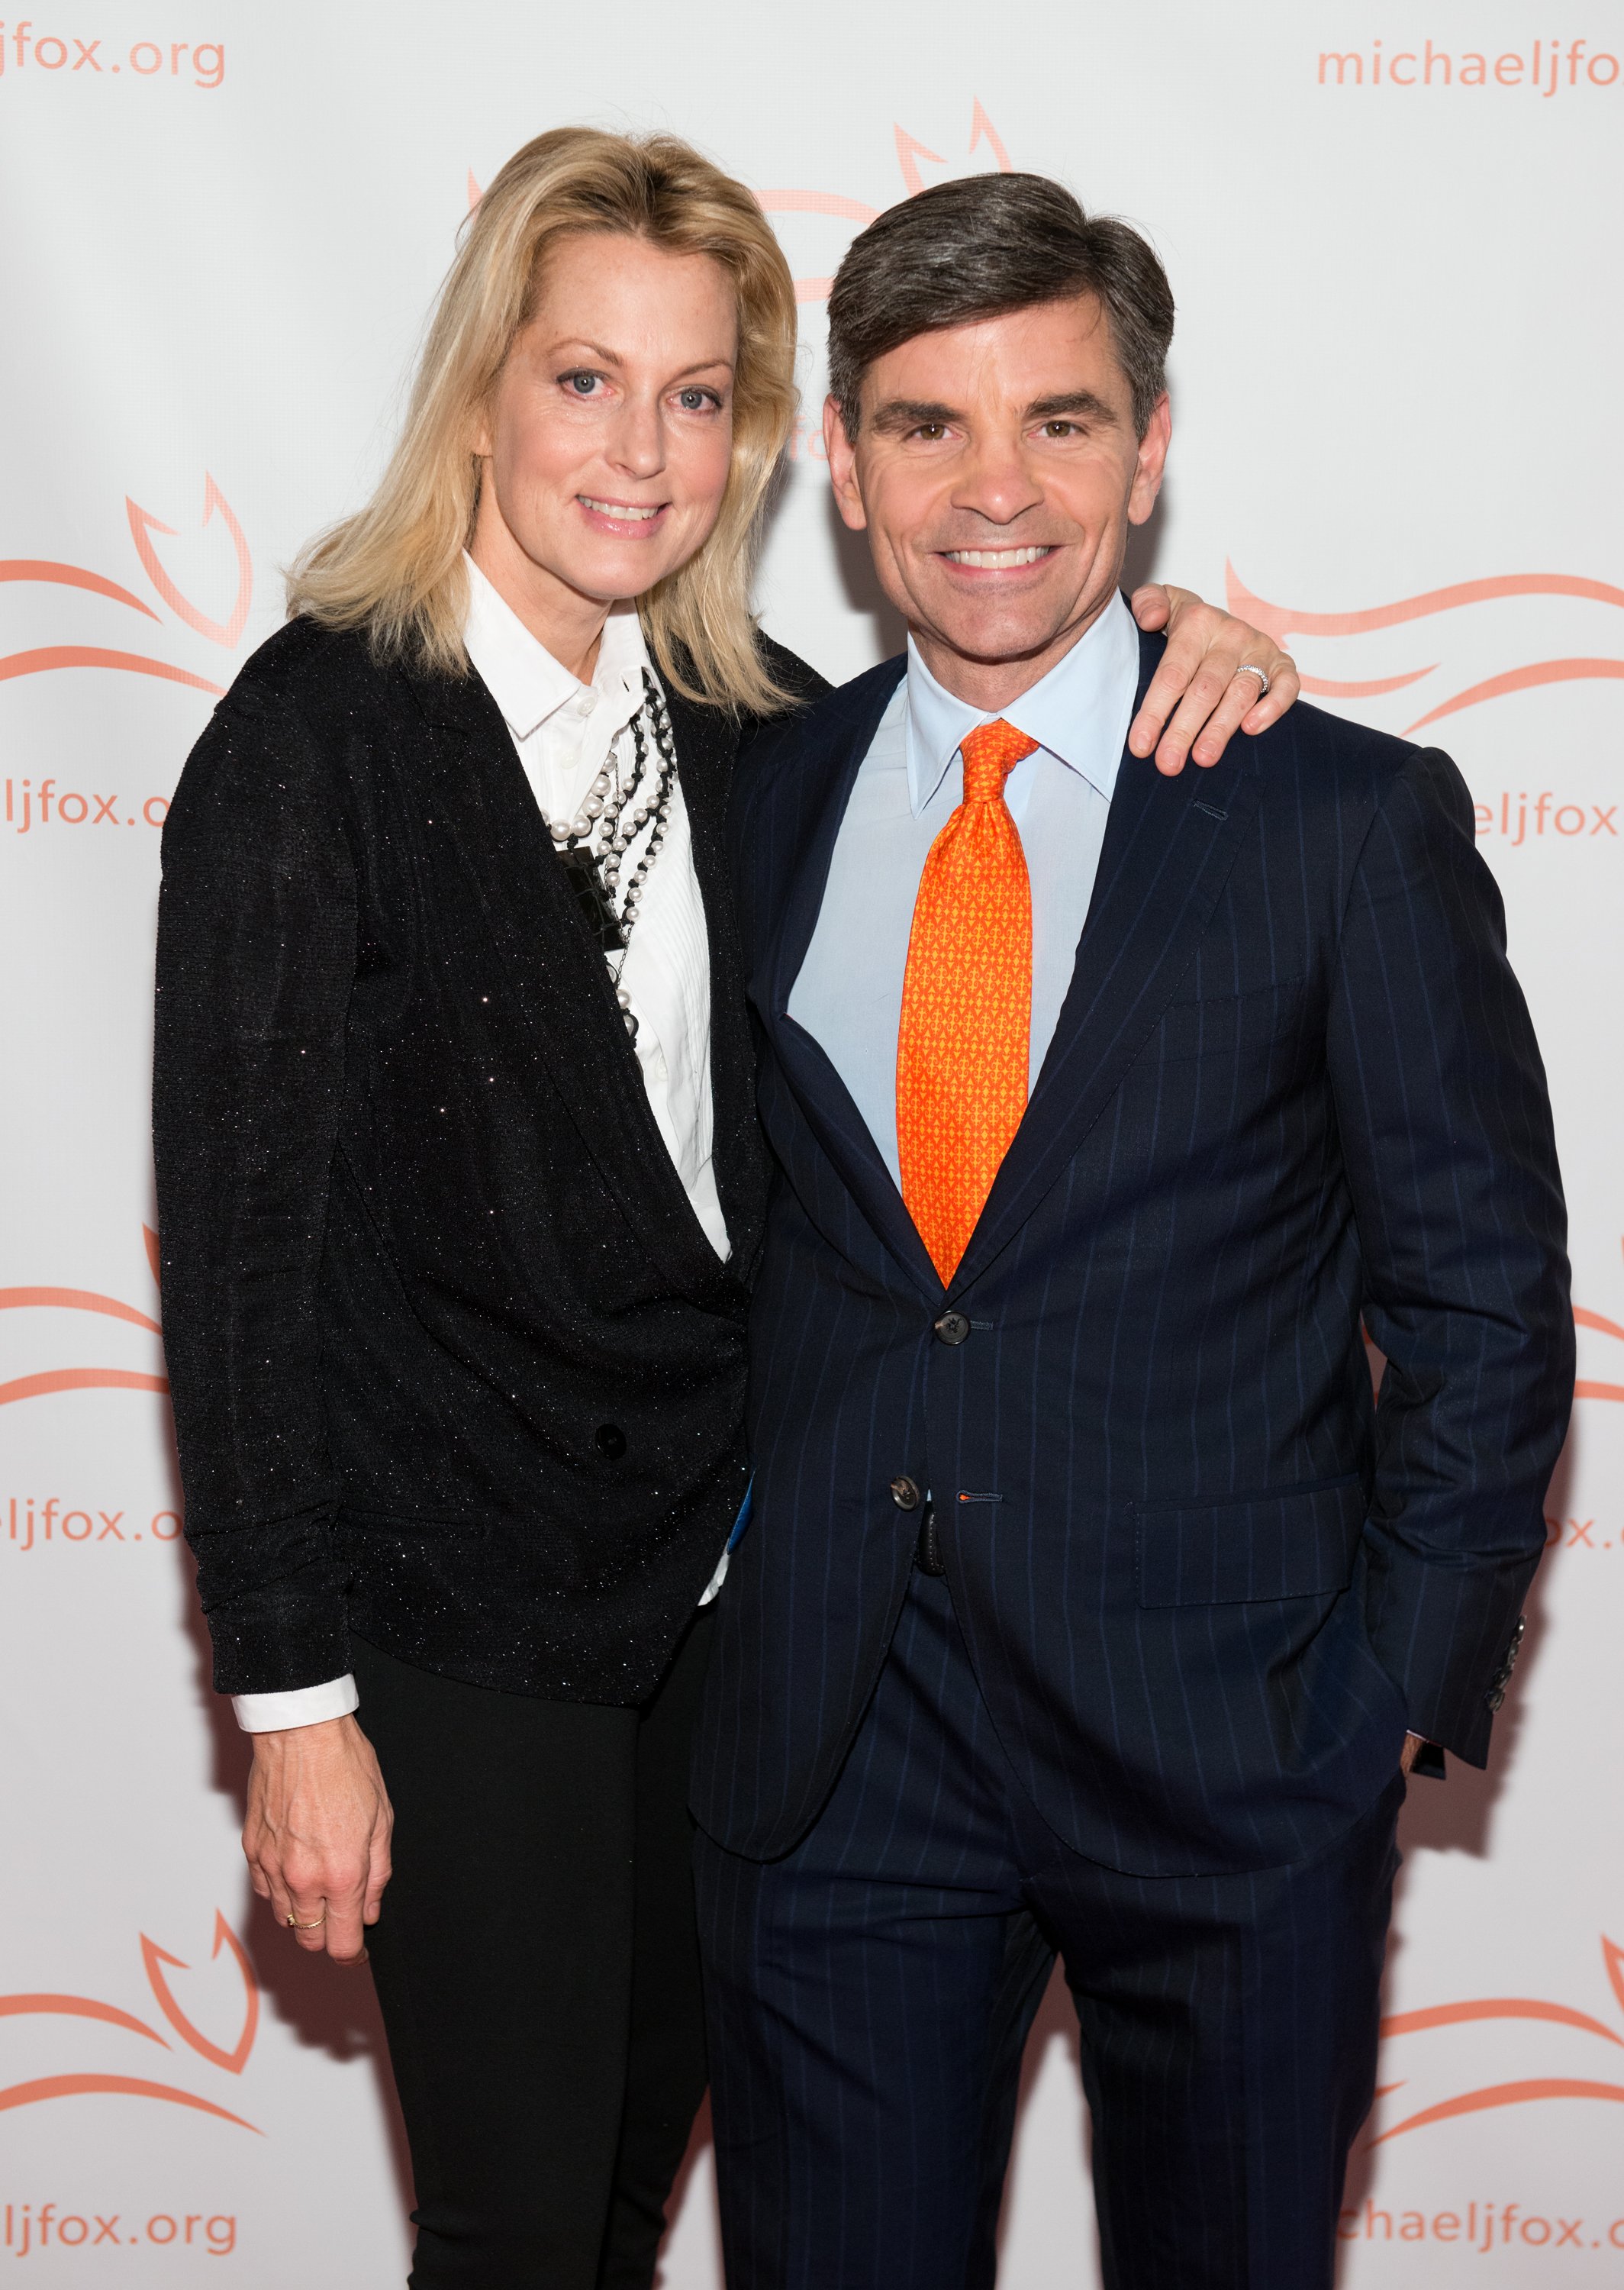 Ali Wentworth and George Stephanopoulos attend the Michael J. Fox Foundation's "A Funny Thing Happened On The Way To Cure Parkinson's" Gala on November 14, 2015. | Photo: Getty Images.